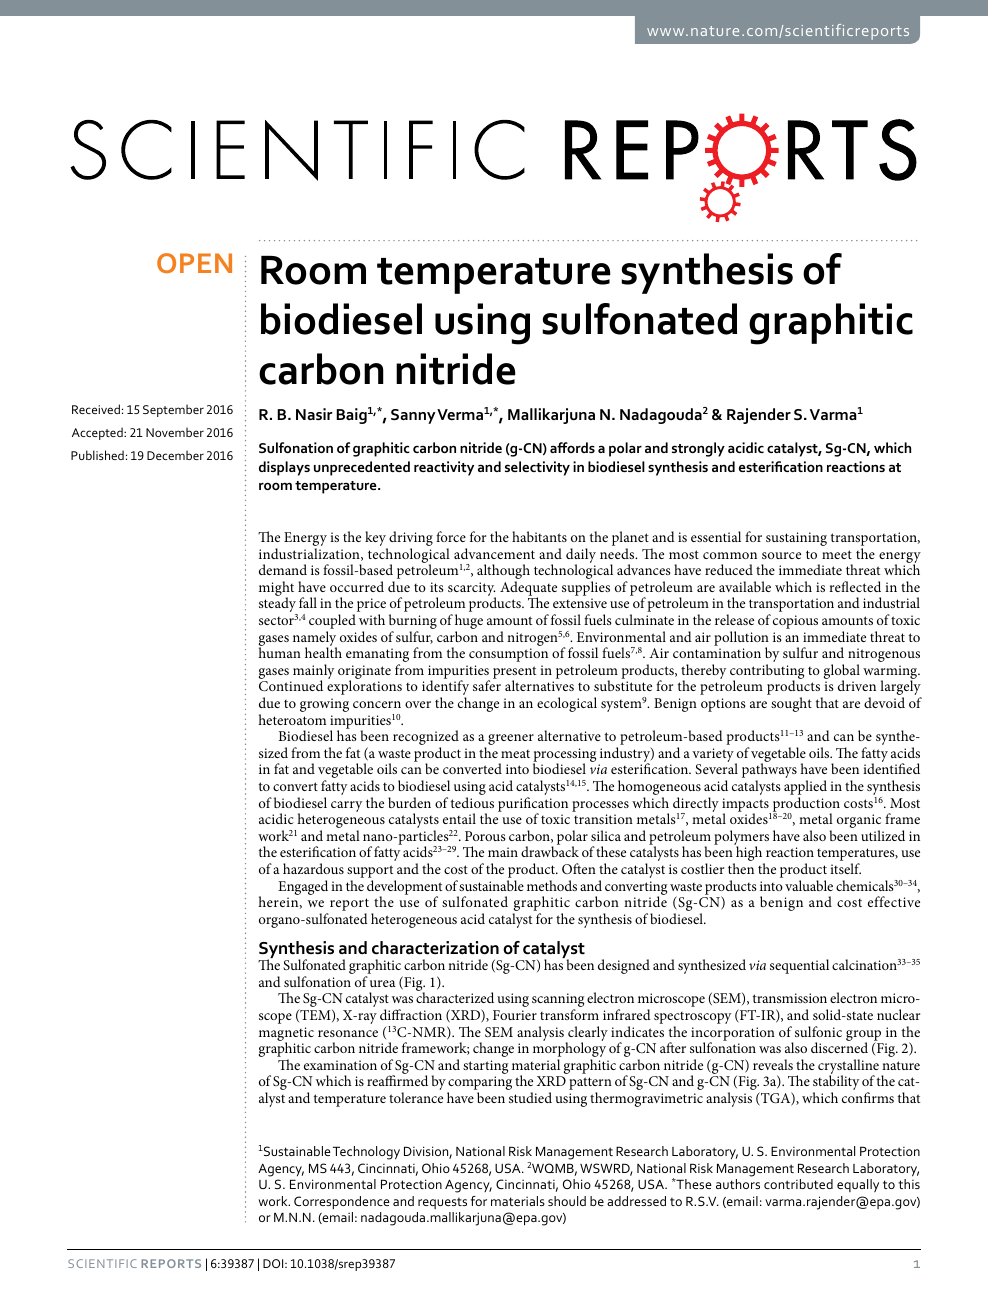 Room Temperature Synthesis Of Biodiesel Using Sulfonated Graphitic Carbon Nitride Topic Of Research Paper In Chemical Sciences Download Scholarly Article Pdf And Read For Free On Cyberleninka Open Science Hub